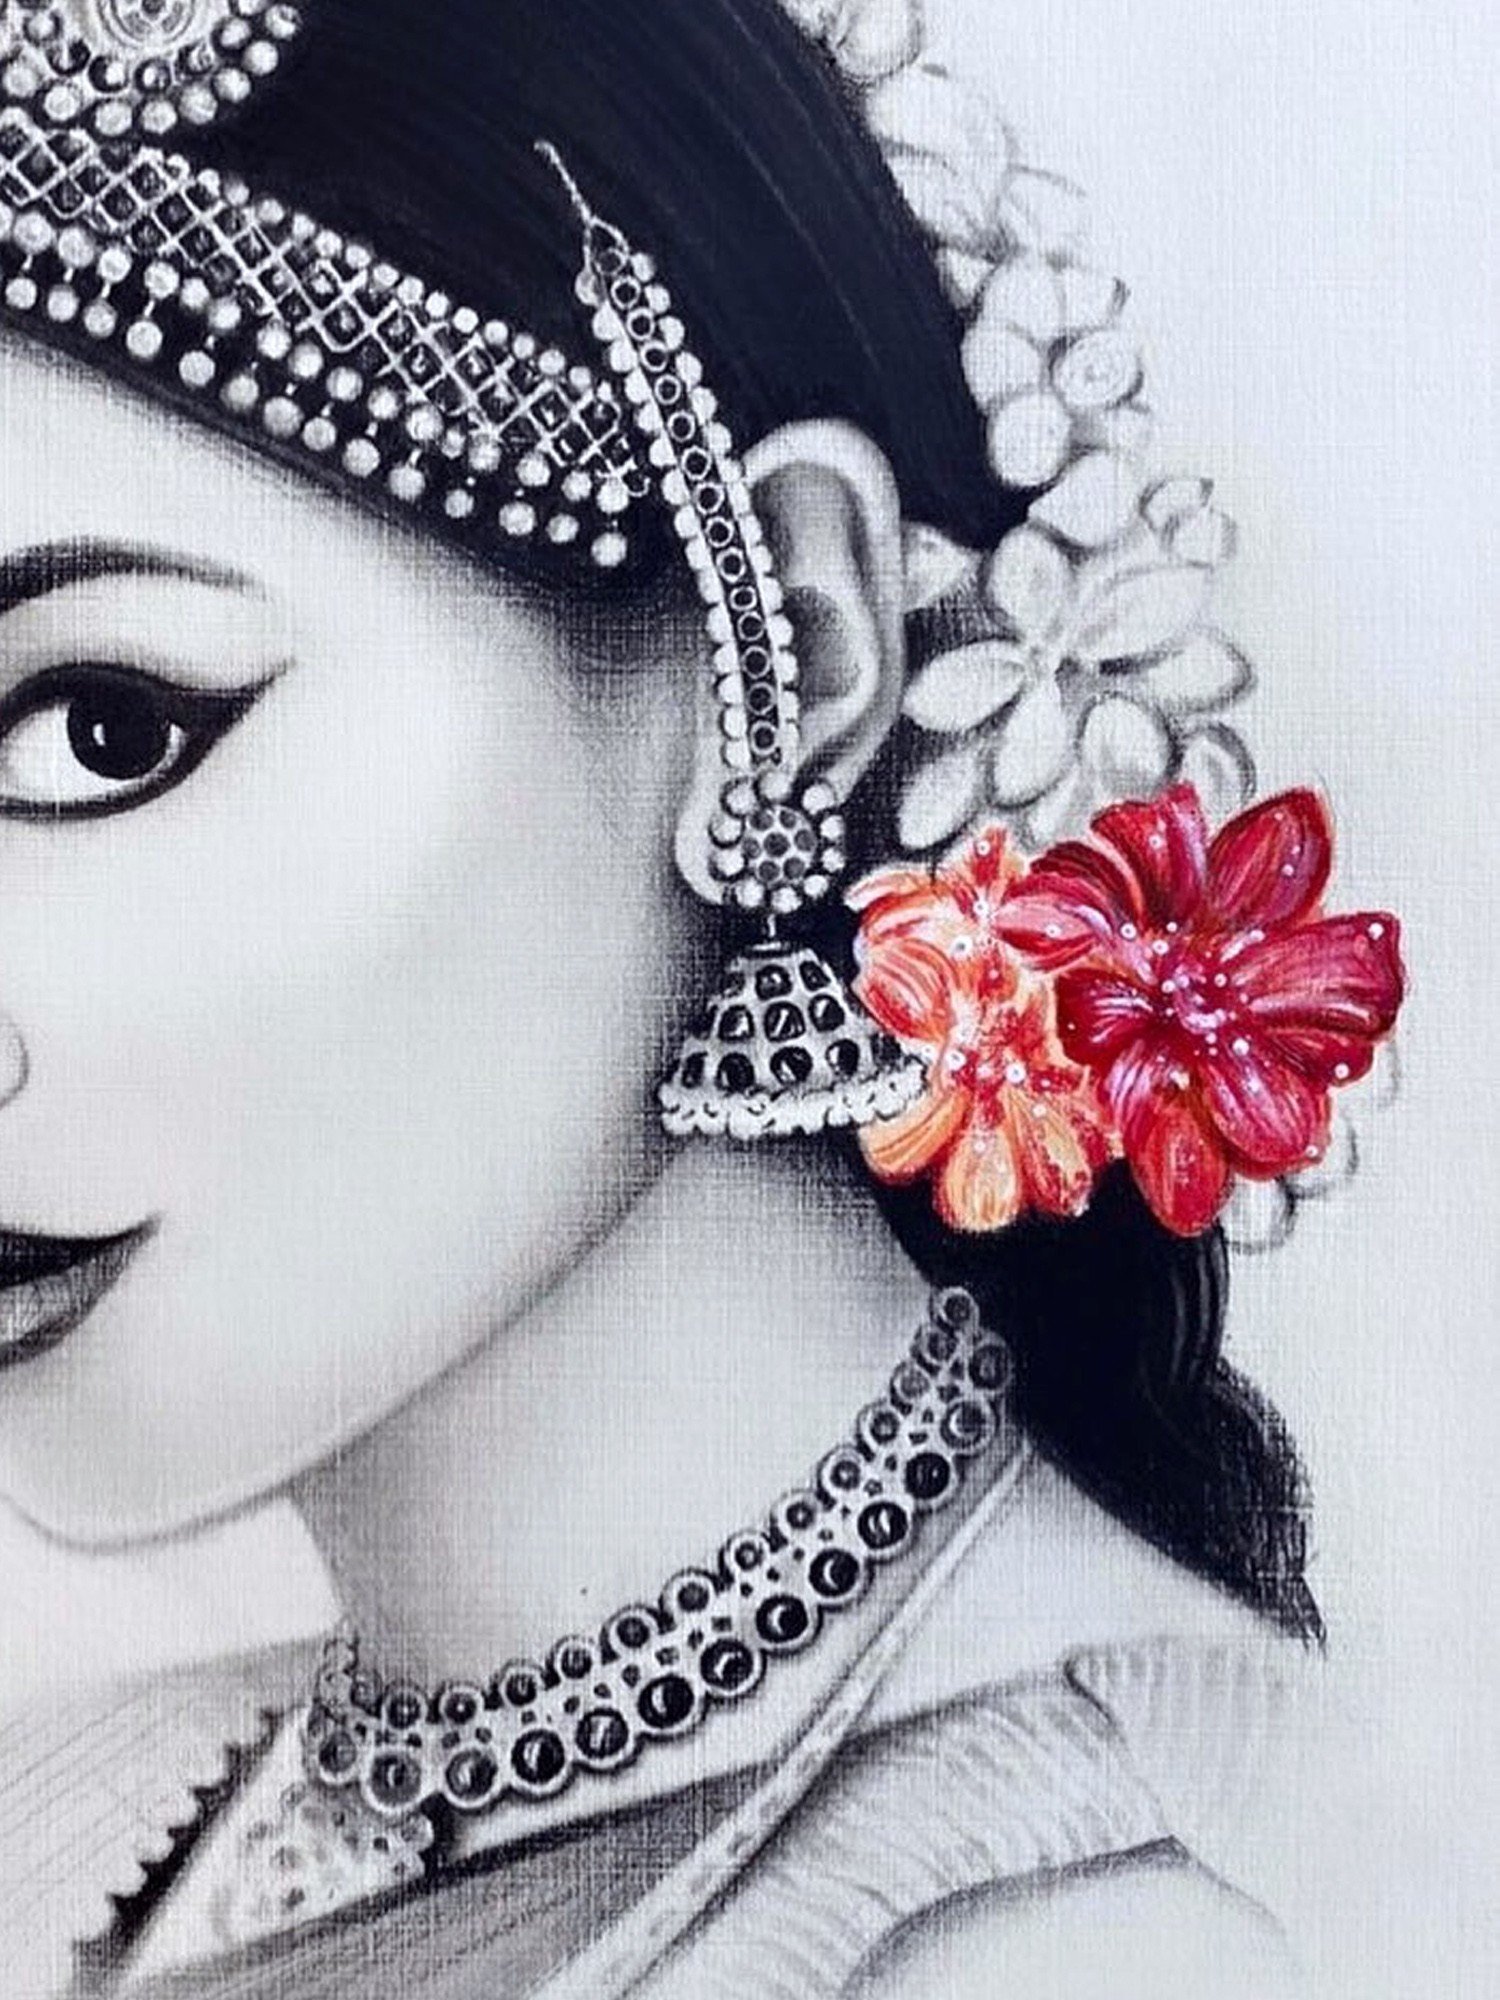 Indian bride 1 Drawing by Pushpa Sharma  Pixels